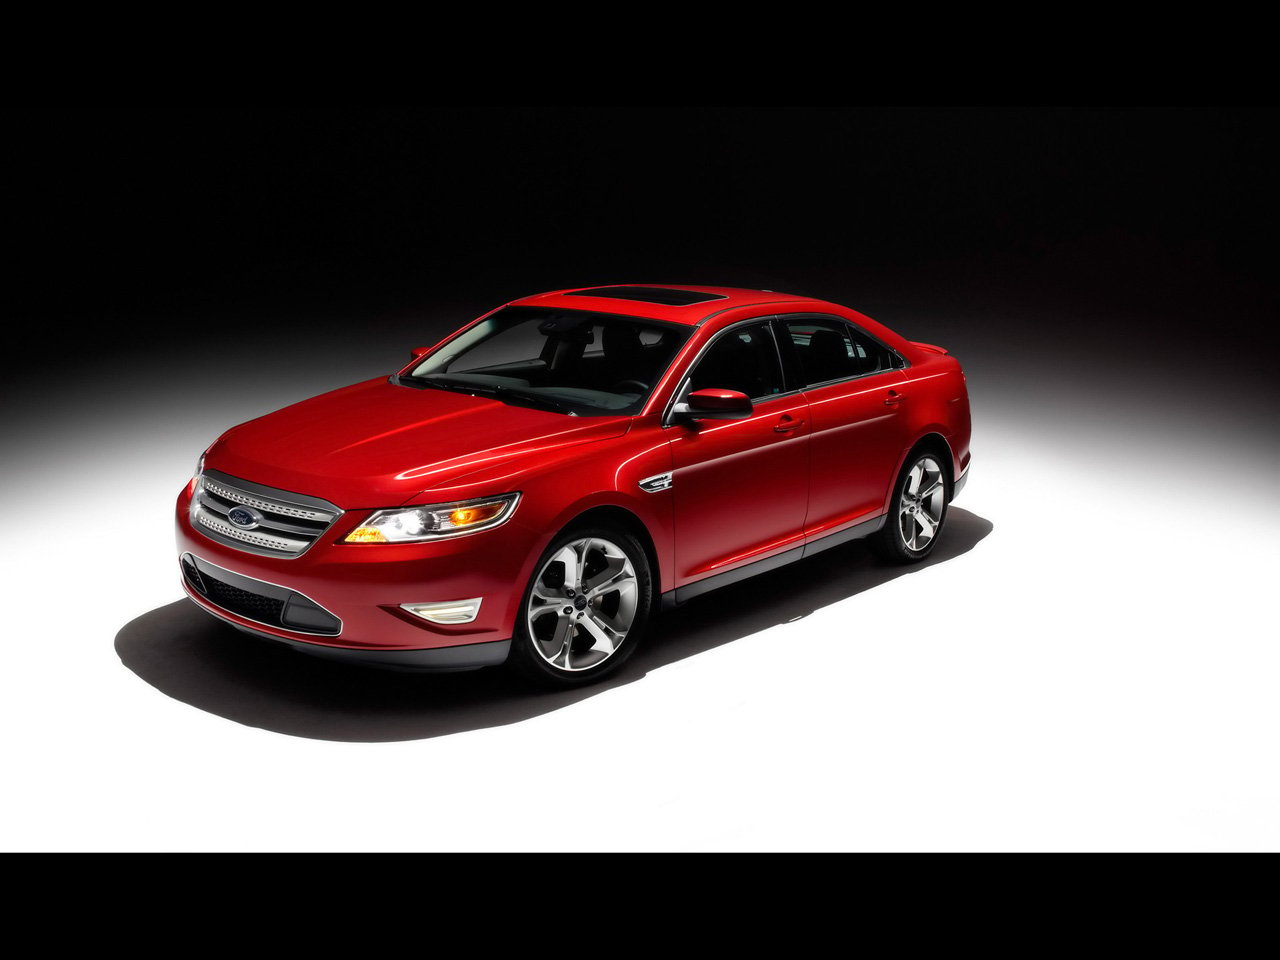 2010 Ford Taurus Wallpapers   500 Collection HD Wallpaper